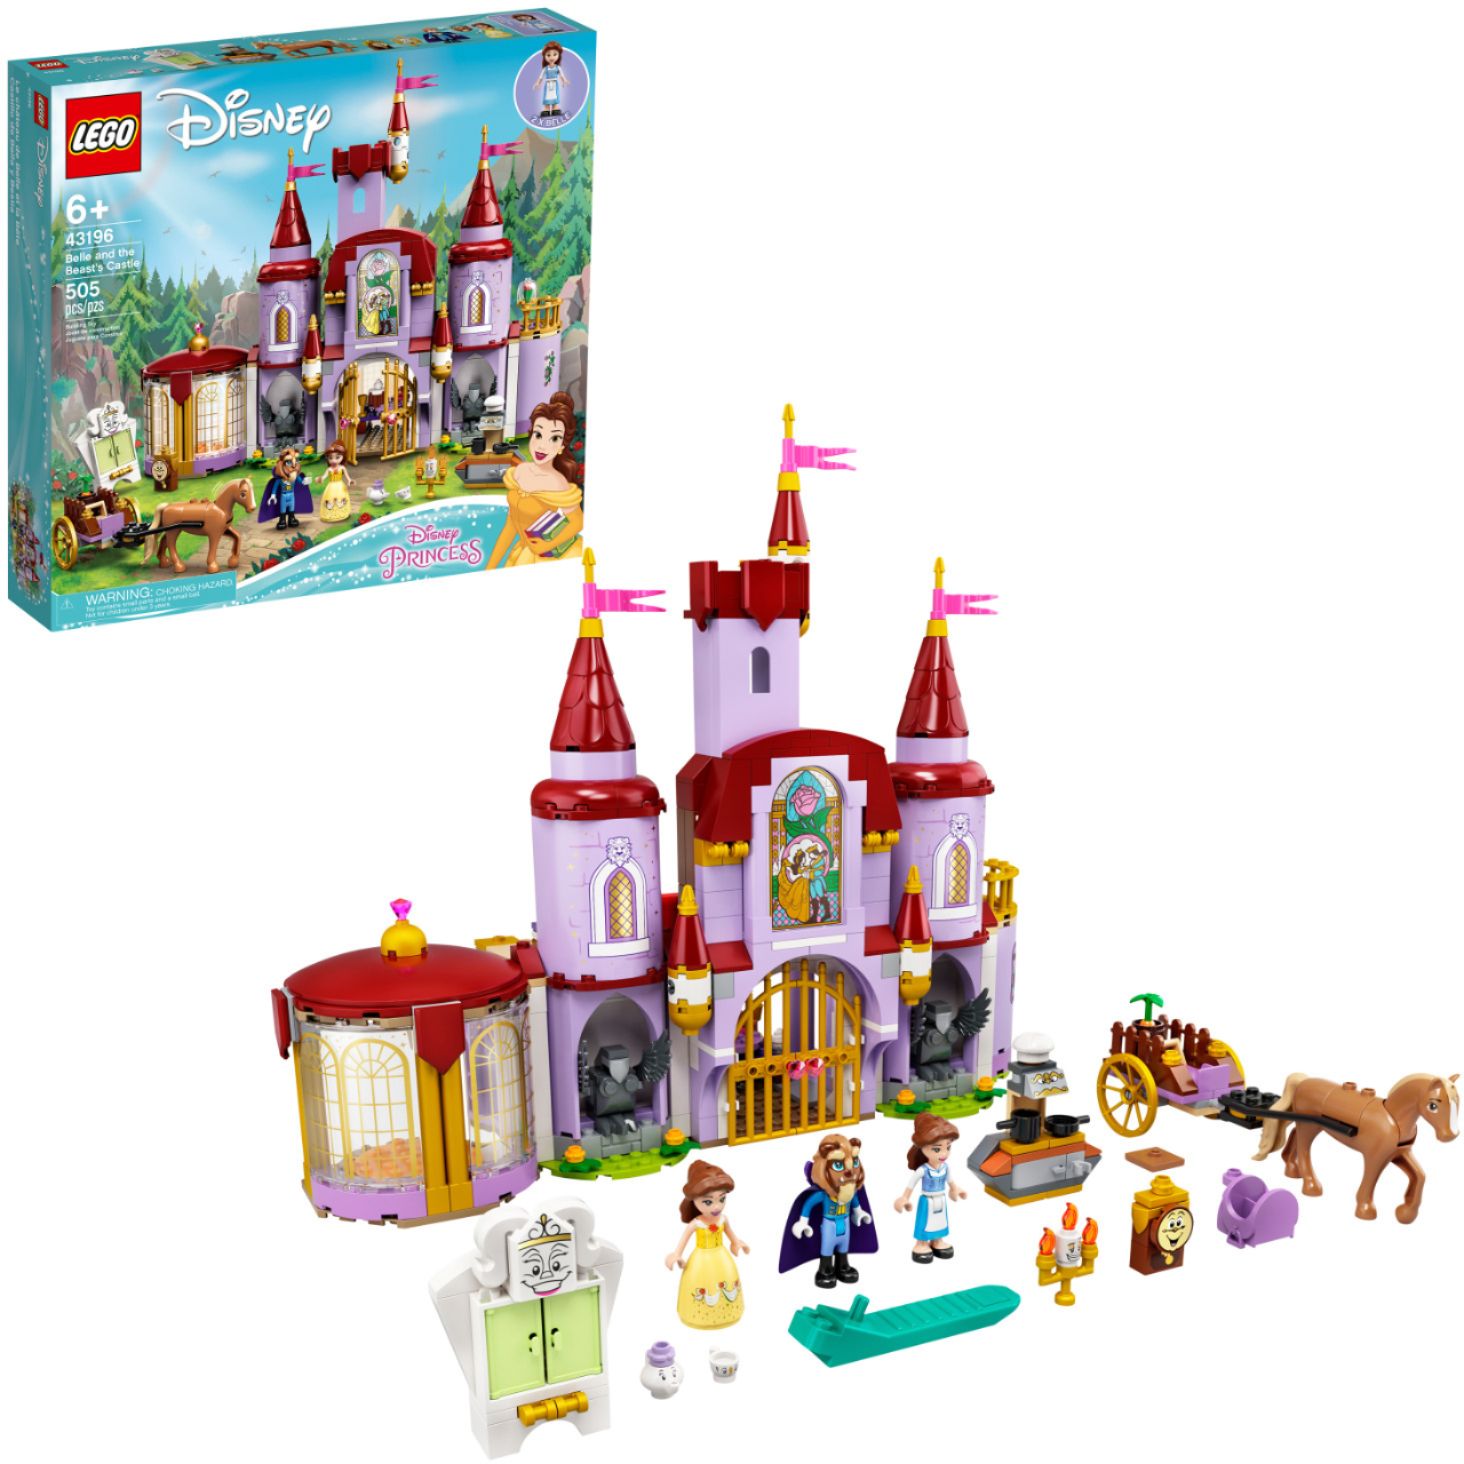 Beauty and The Beast Princess Belle's Enchanted Castle building blocks legoingly 